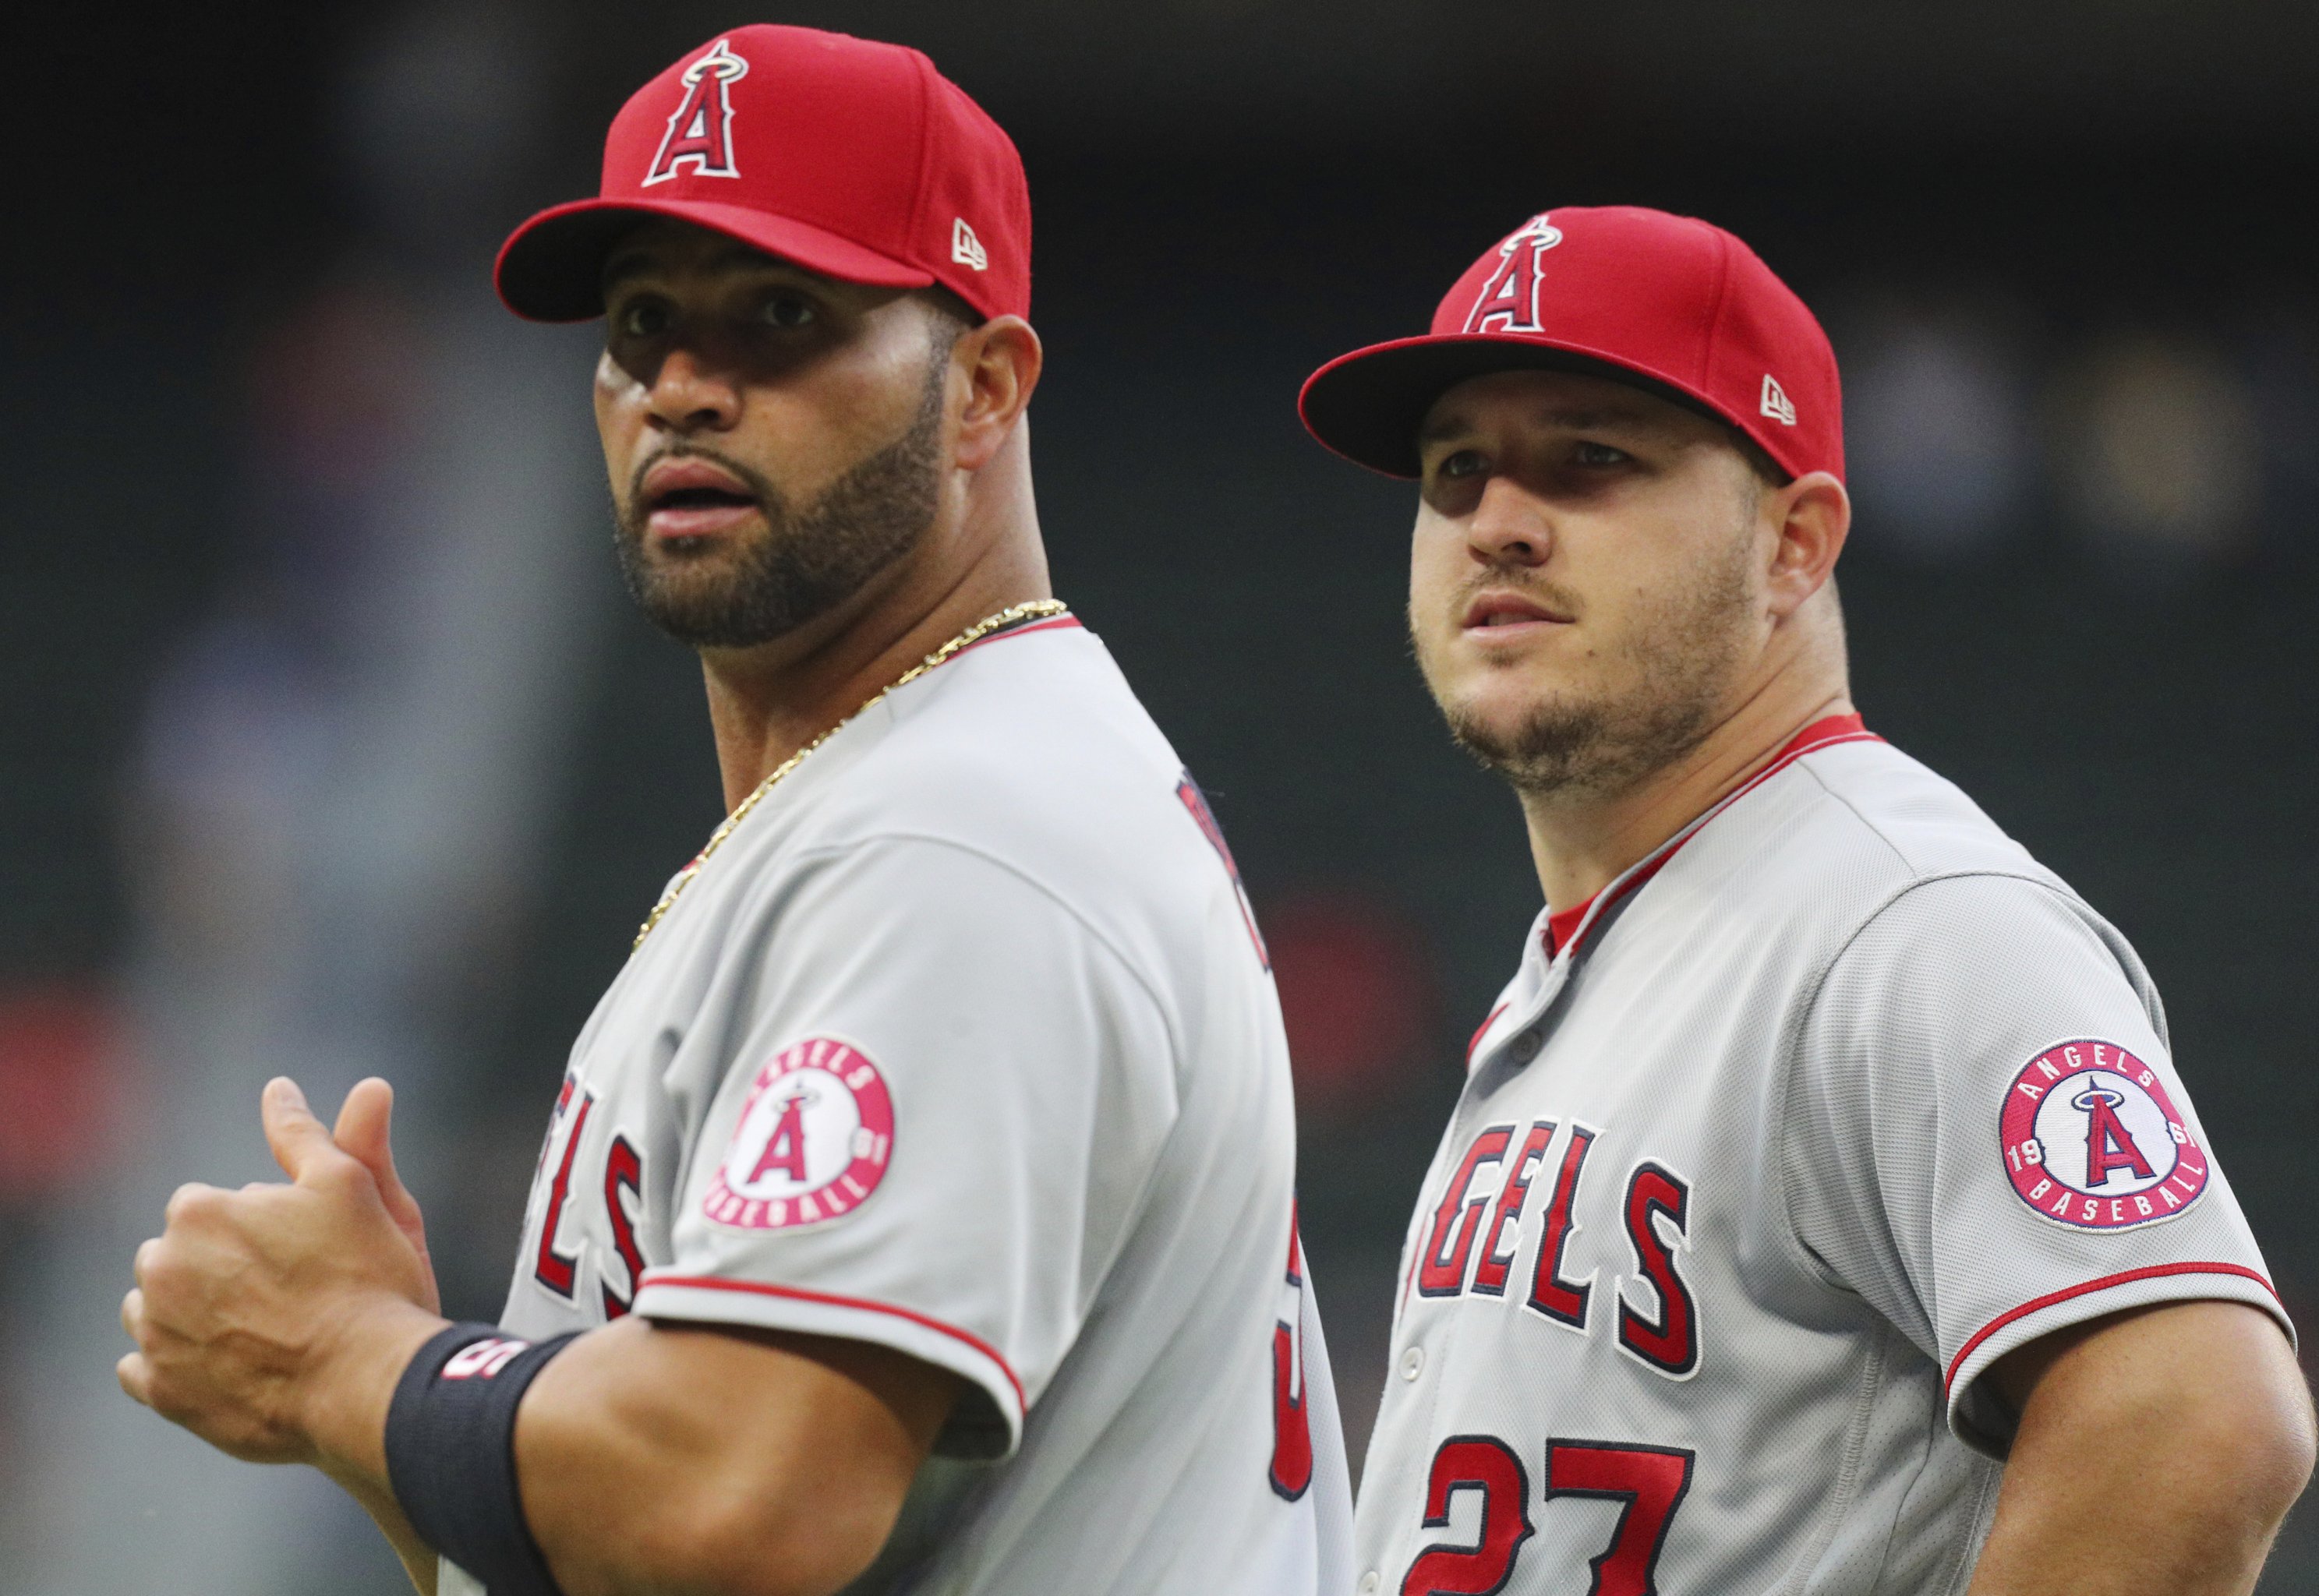 I know many of us had issues with Pujols in the past, but I'm happy for  him. : r/angelsbaseball